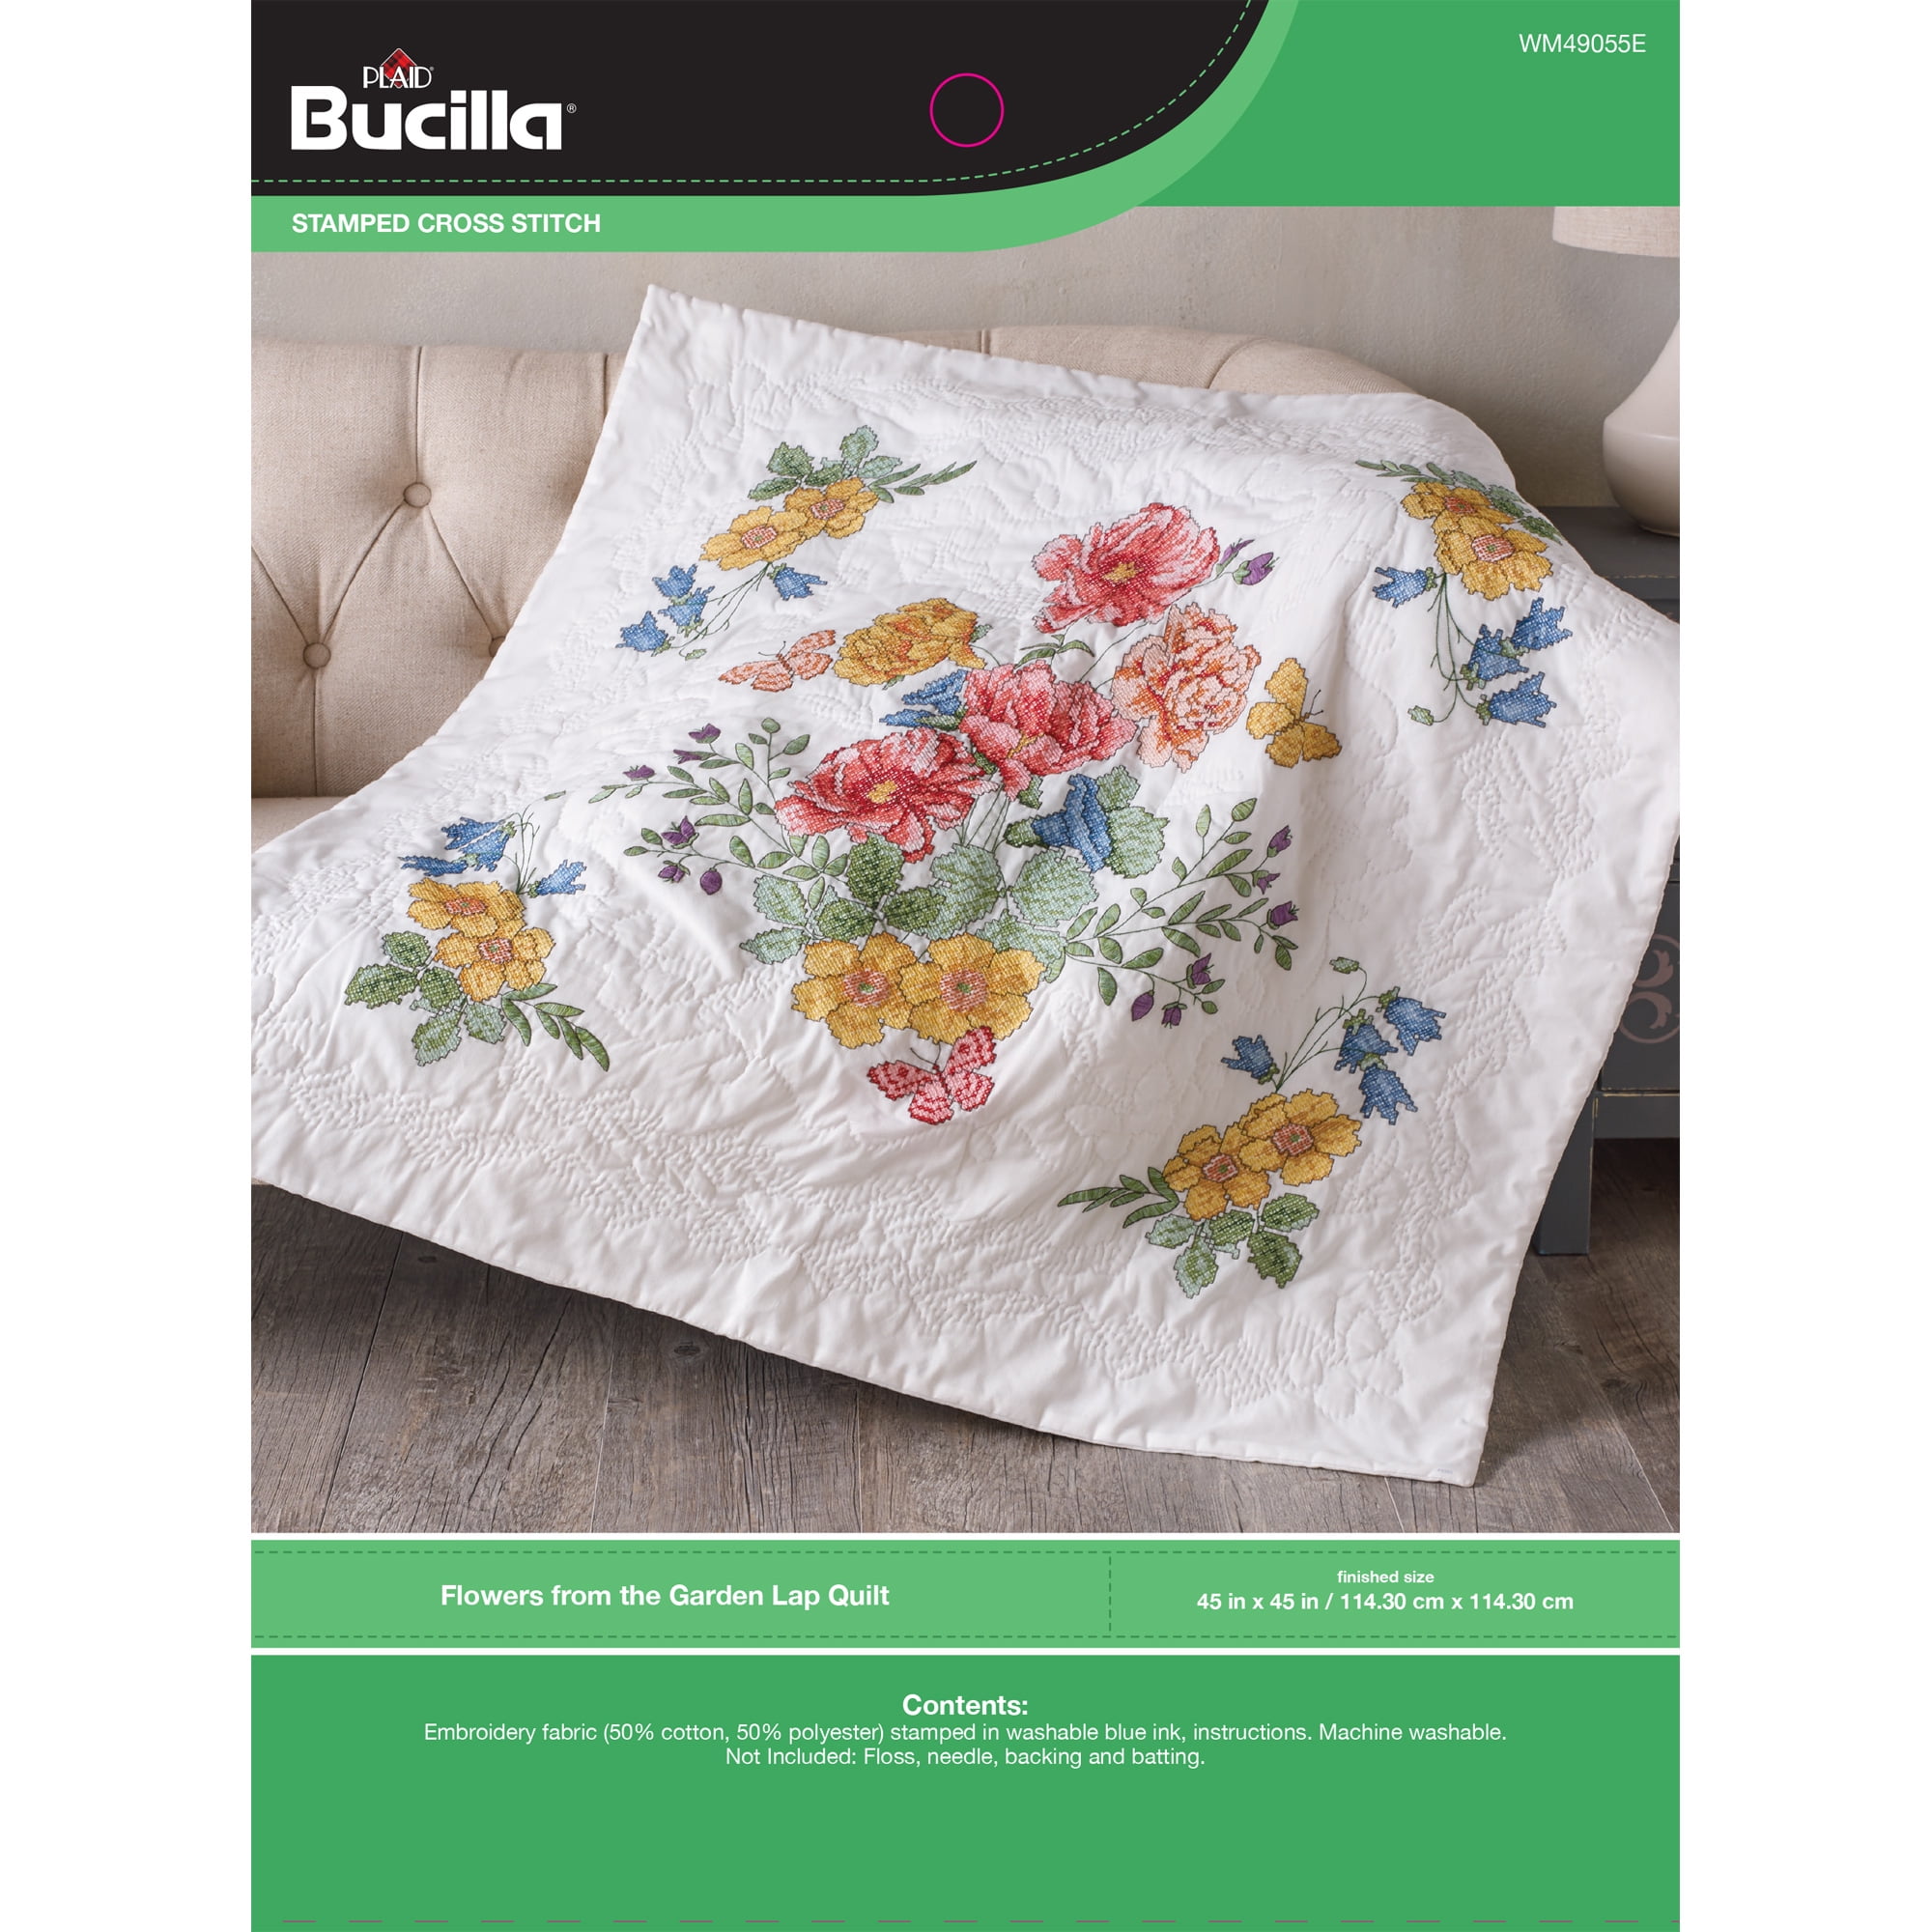 Bucilla Full Color Fabric Stamped Embroidery Kit - Floral Bouquet